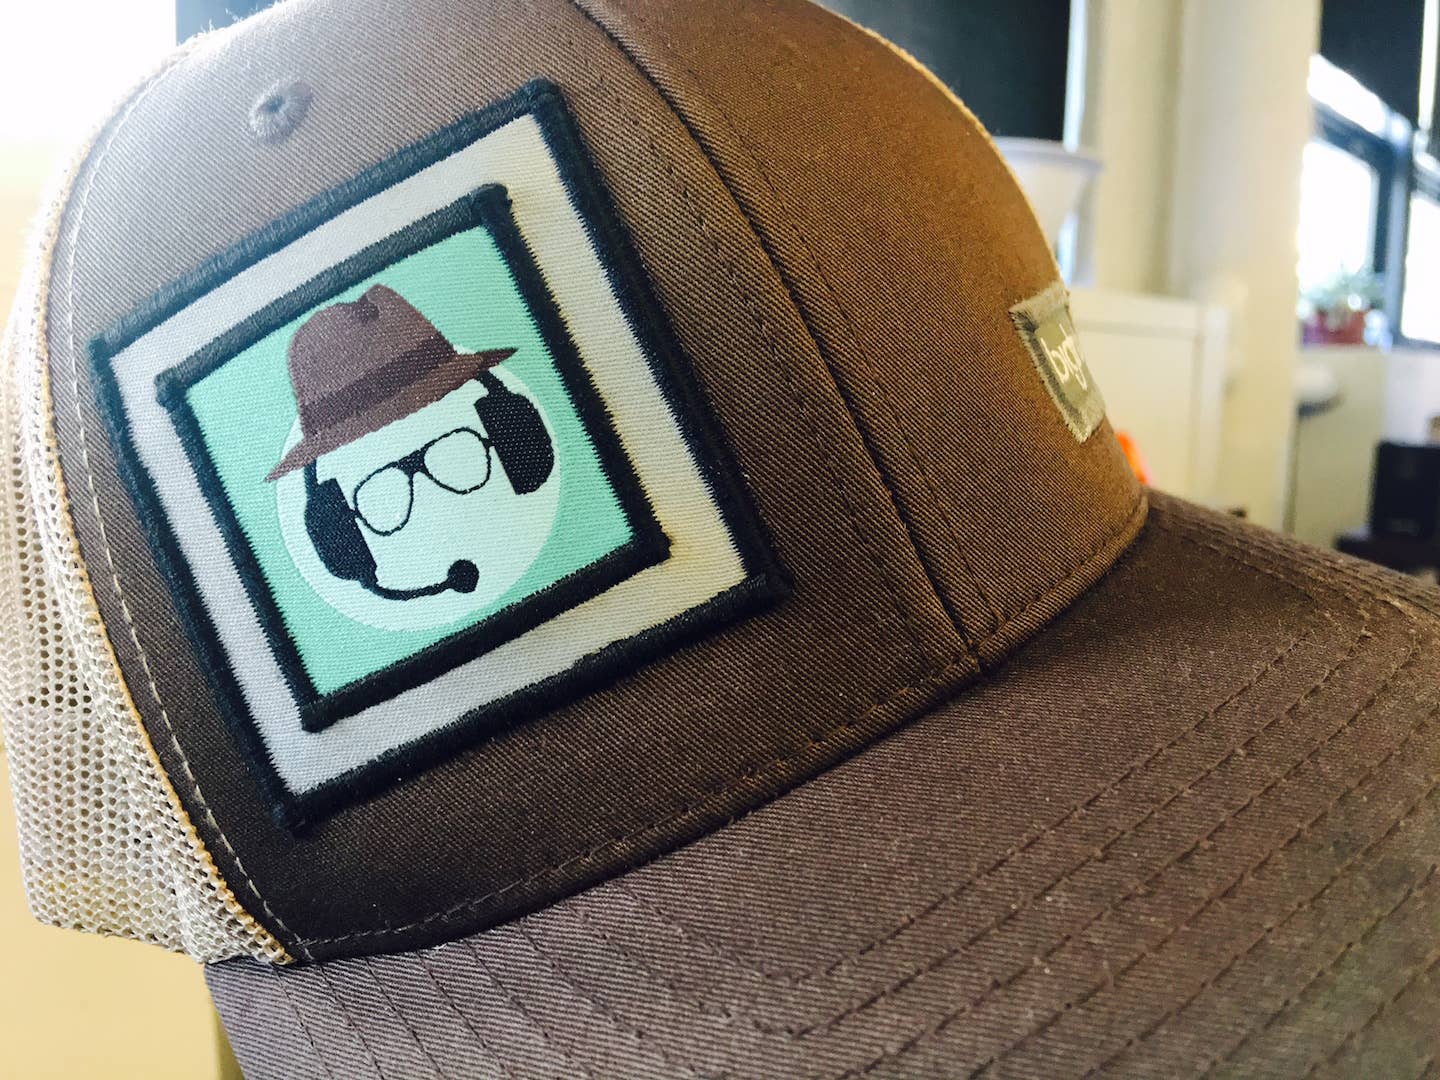 Can You Guess the Logo on this Trucker Hat?